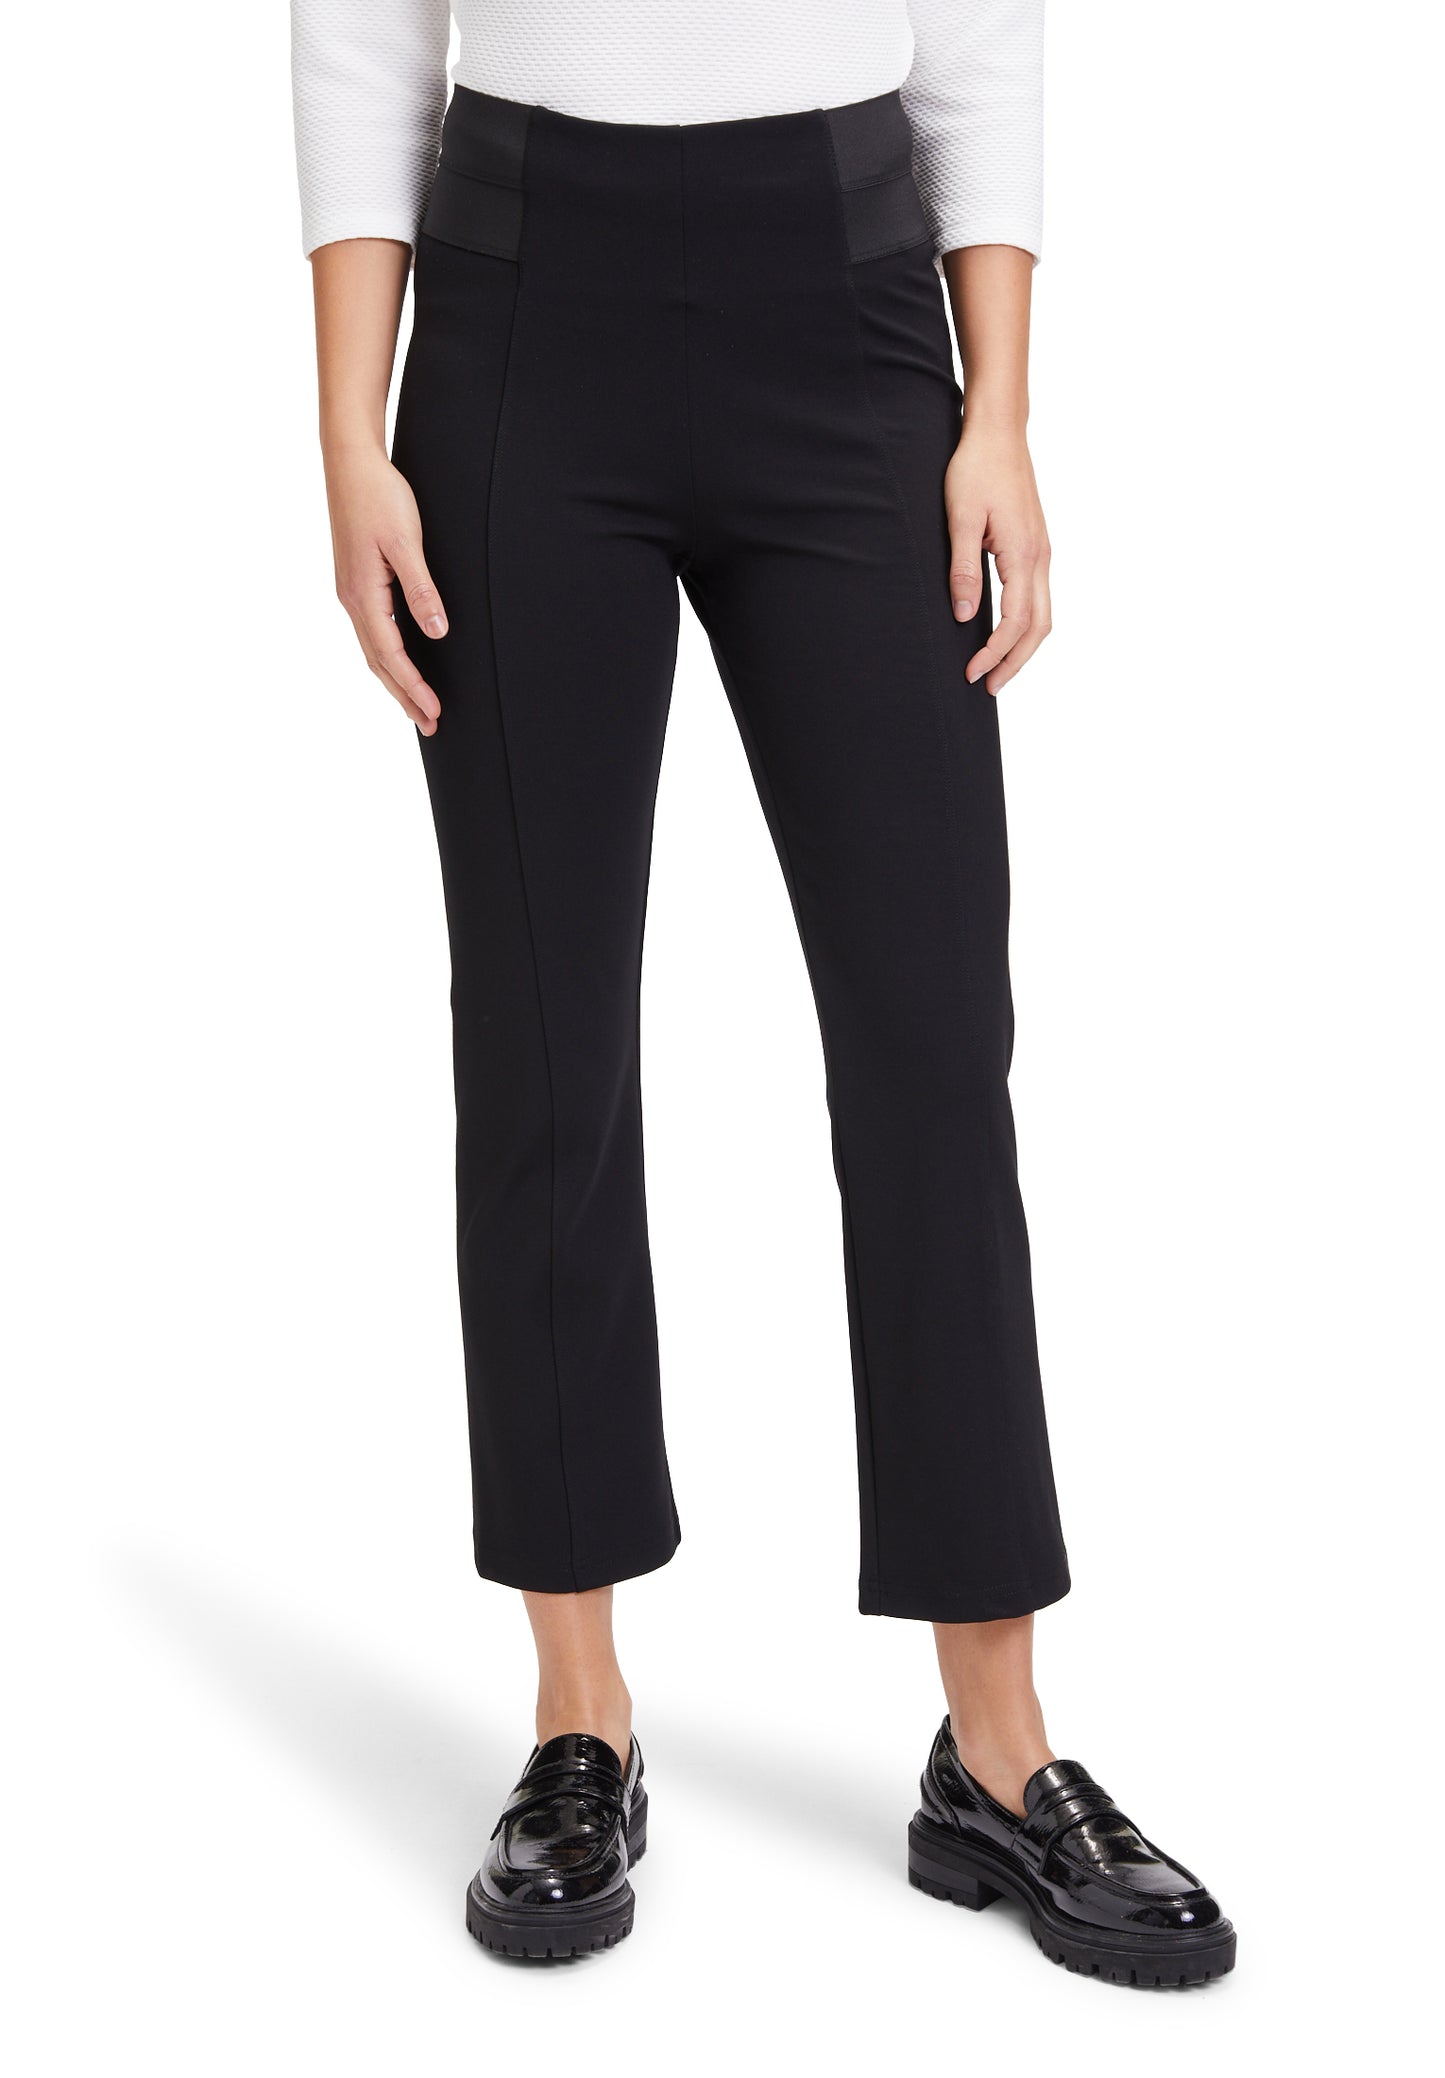 Betty Barclay Black Trousers